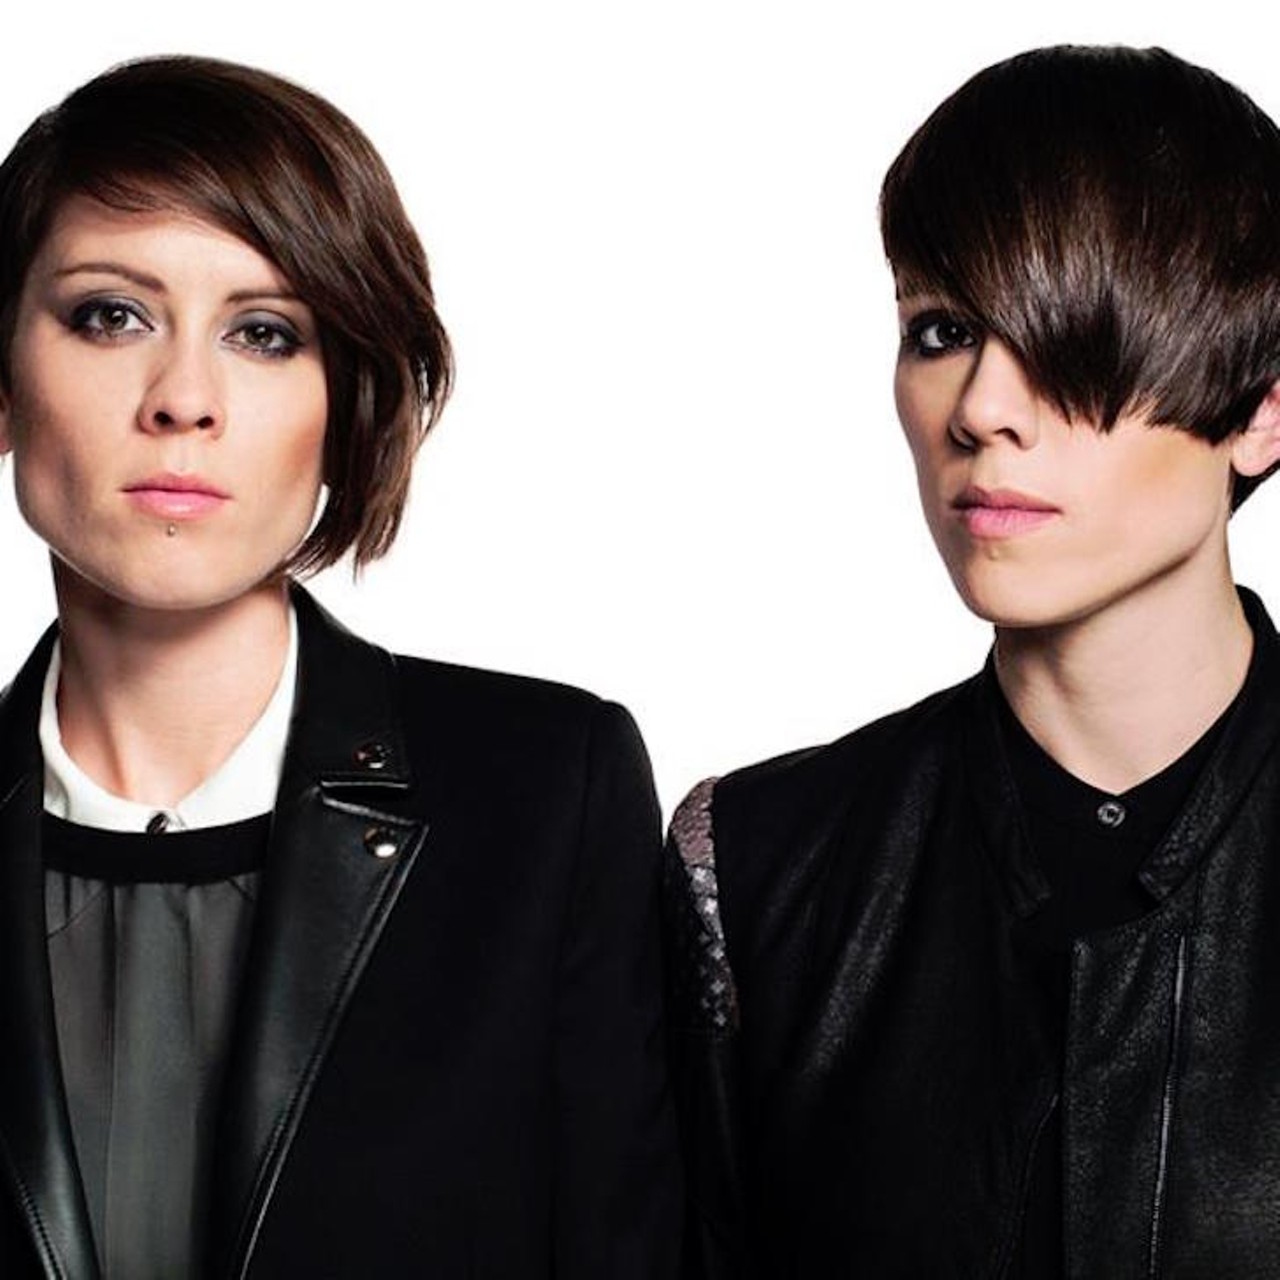 Tegan and Sara at The Beacham
Nov. 14, 46 N Orange Ave, 407-648-8363 
Canadian indie pop icons Tegan and Sara Quin are known for their constant touring. This time, they&#146;re promoting their recently-released eight album, Love You to Death. Torres will open. 
Photo via Chris Buck